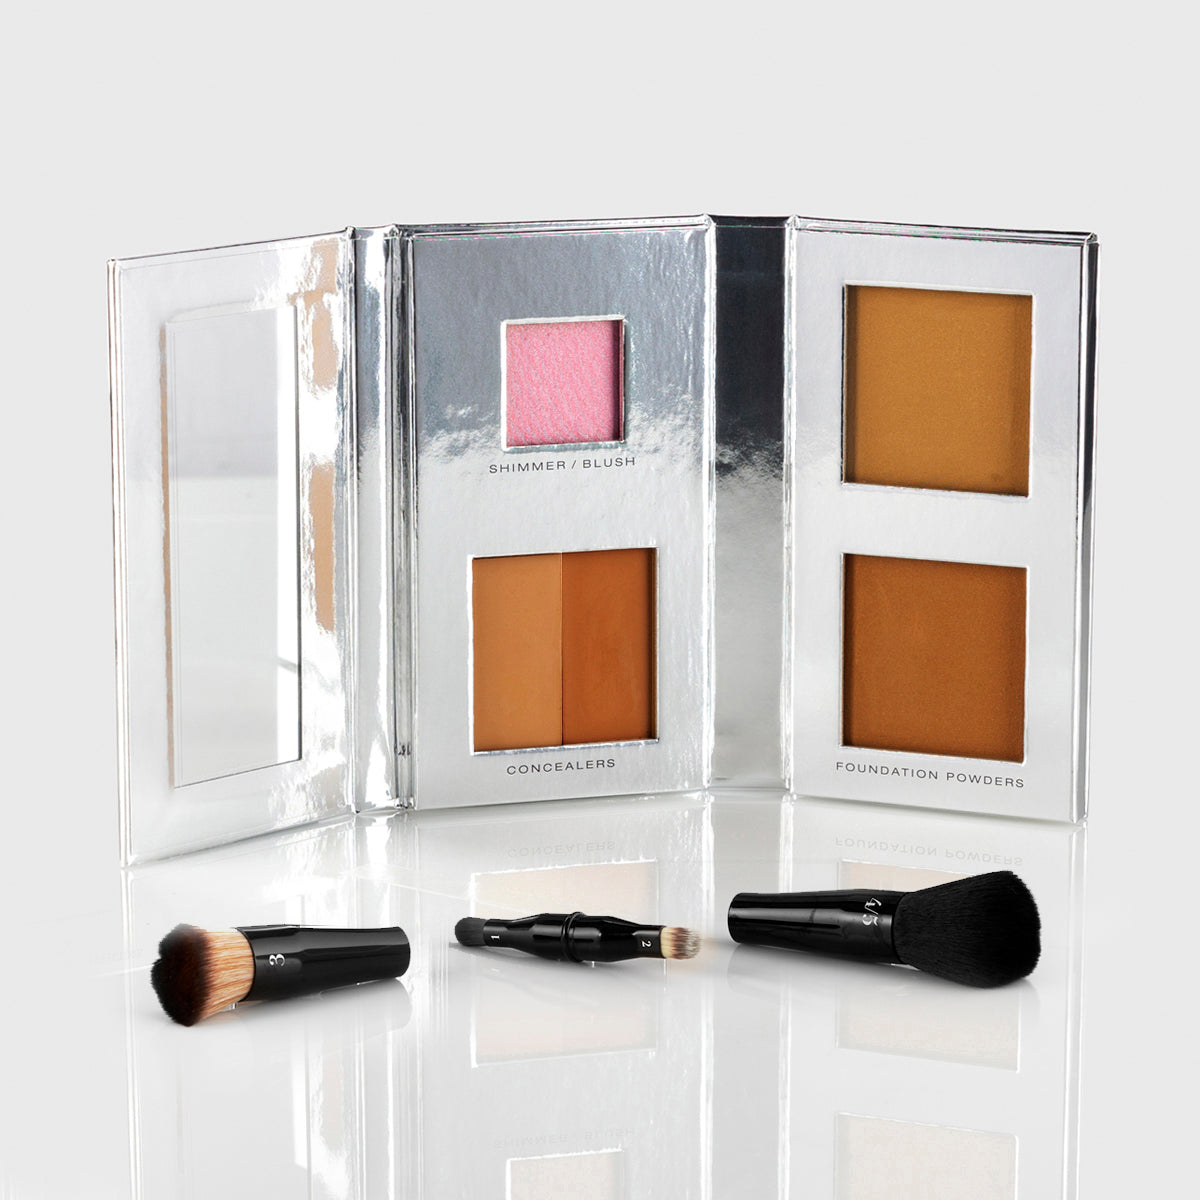 a silver makeup palette with mirrored flap and 1 blush, 2 concealers and 2 foundation powers in medium deep shades; a black, travel-sized nesting brush set is splayed out in front of the palette